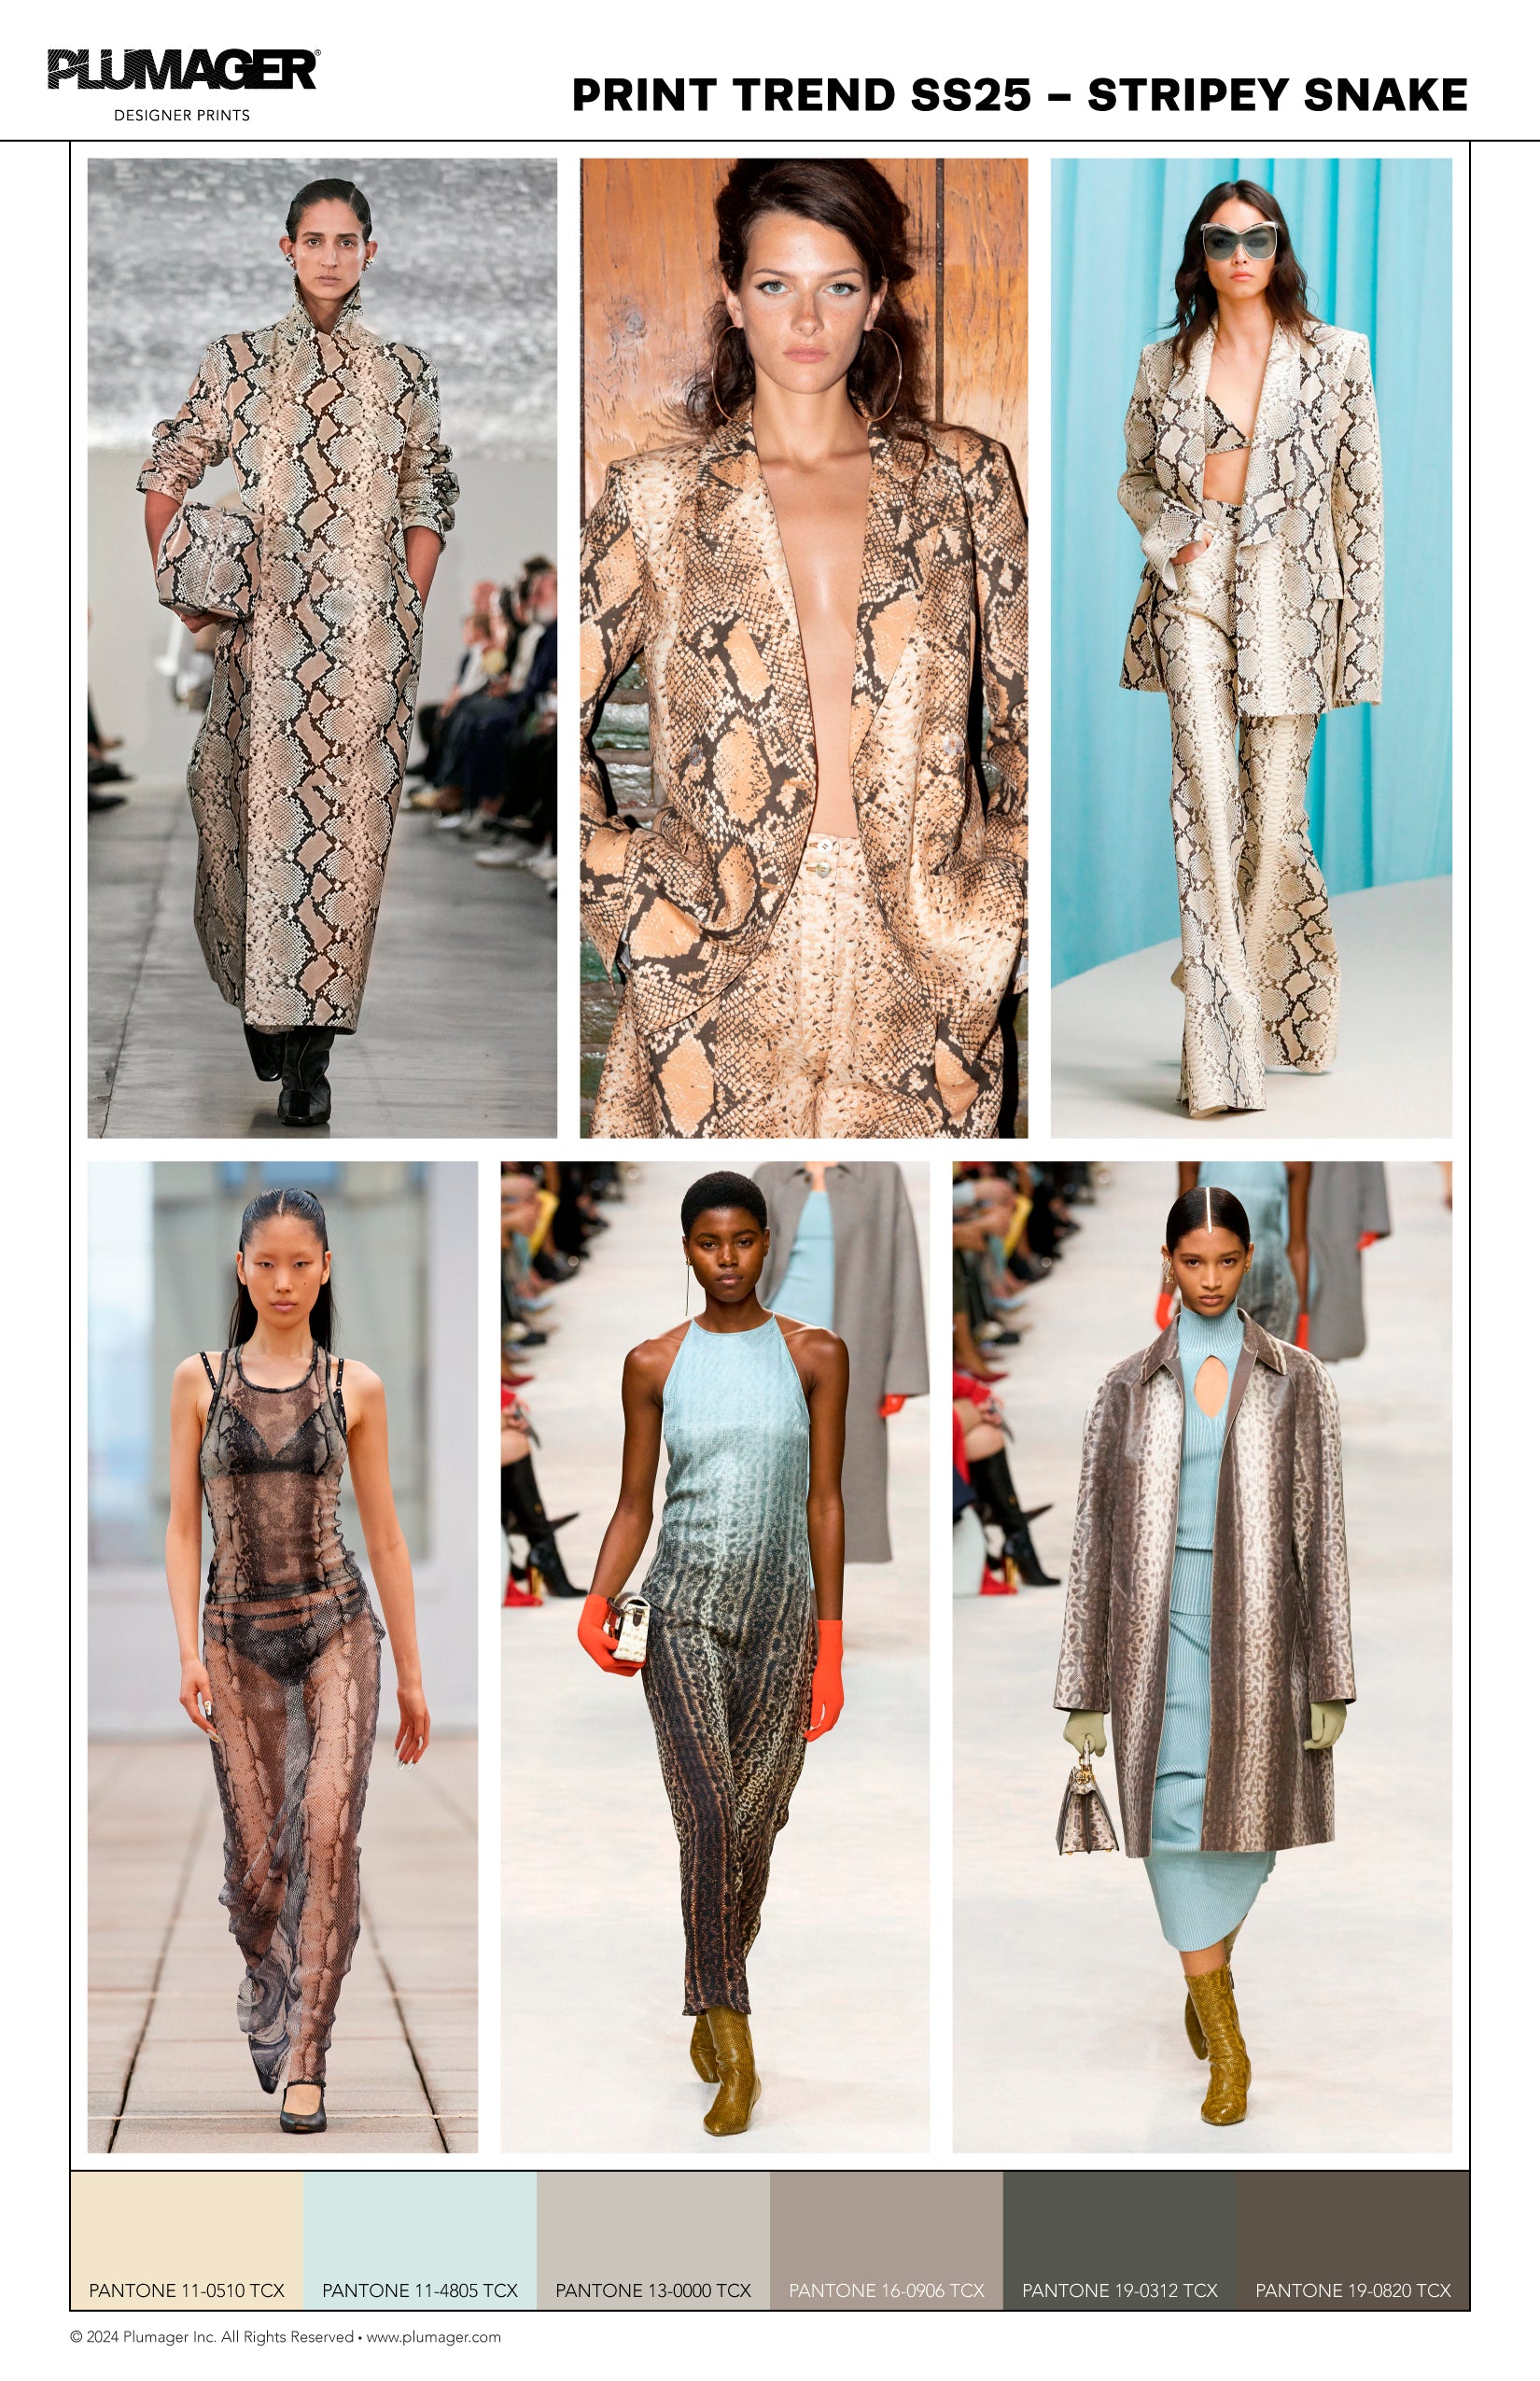 SS25 Print Textile Color Trend Report - Stripey Snake